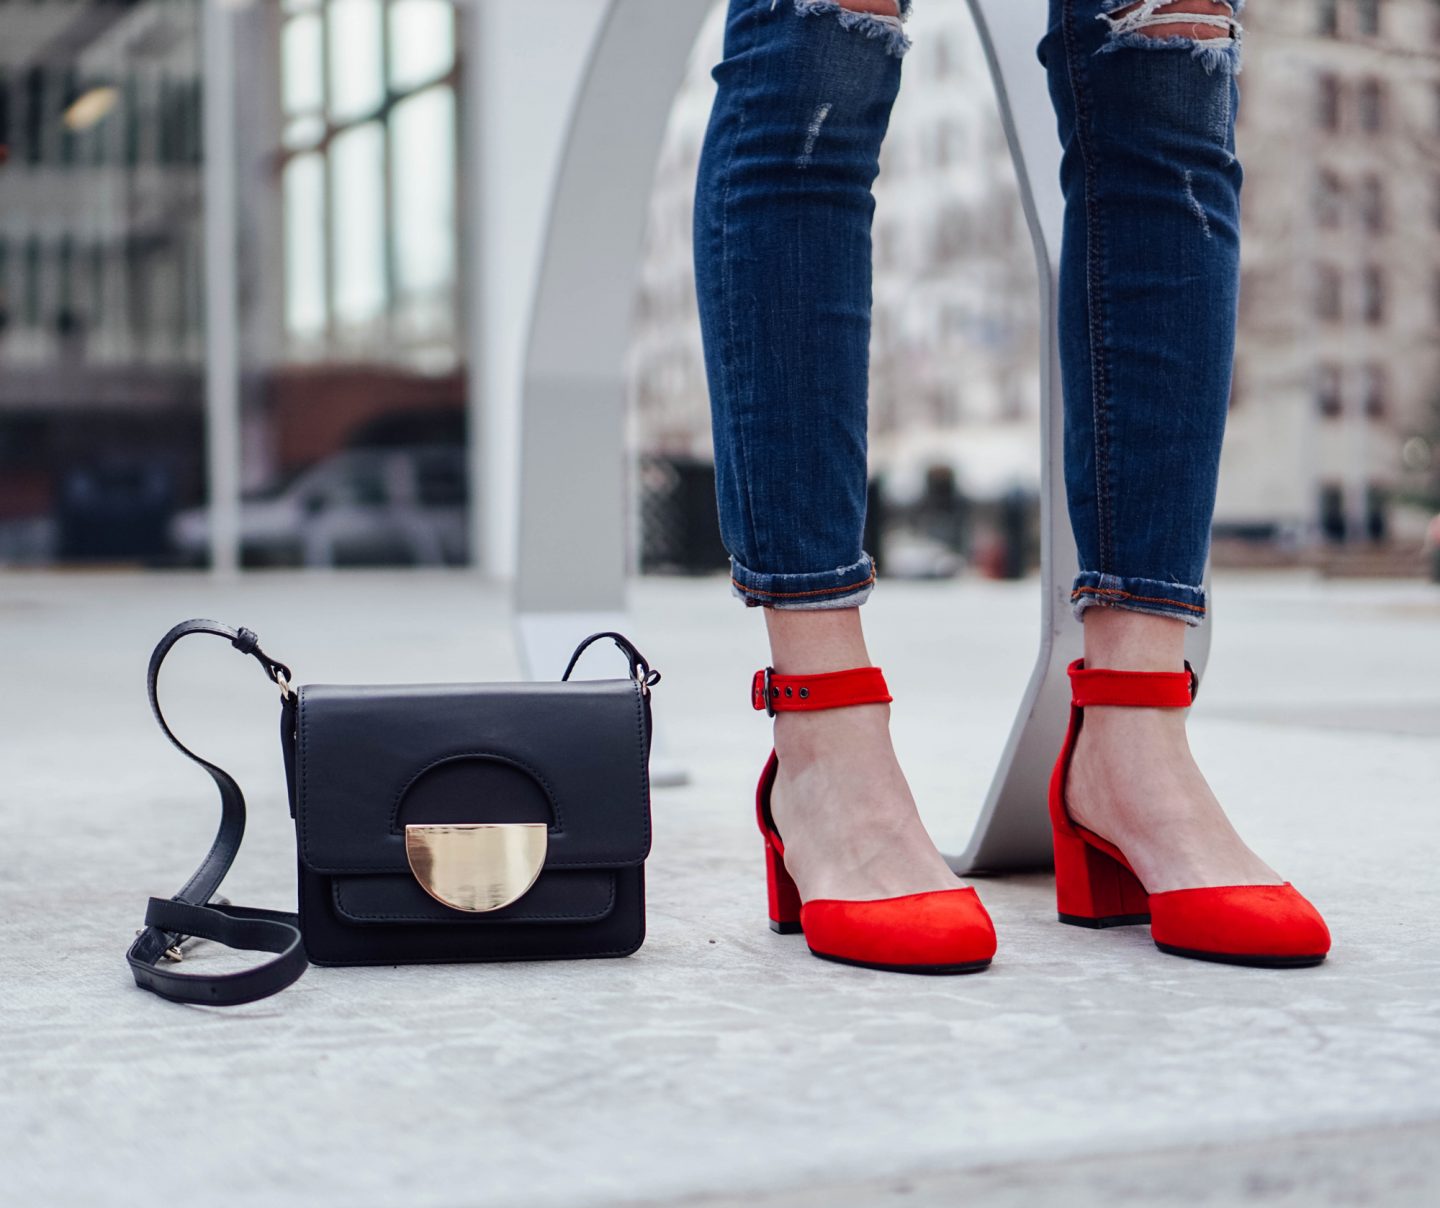  I am partnering with Marks and Spencer on TheDandyLiar.com to update my shoe wardrobe with some fresh new styles, like these gorgeous Red Block Heel Court Shoes.